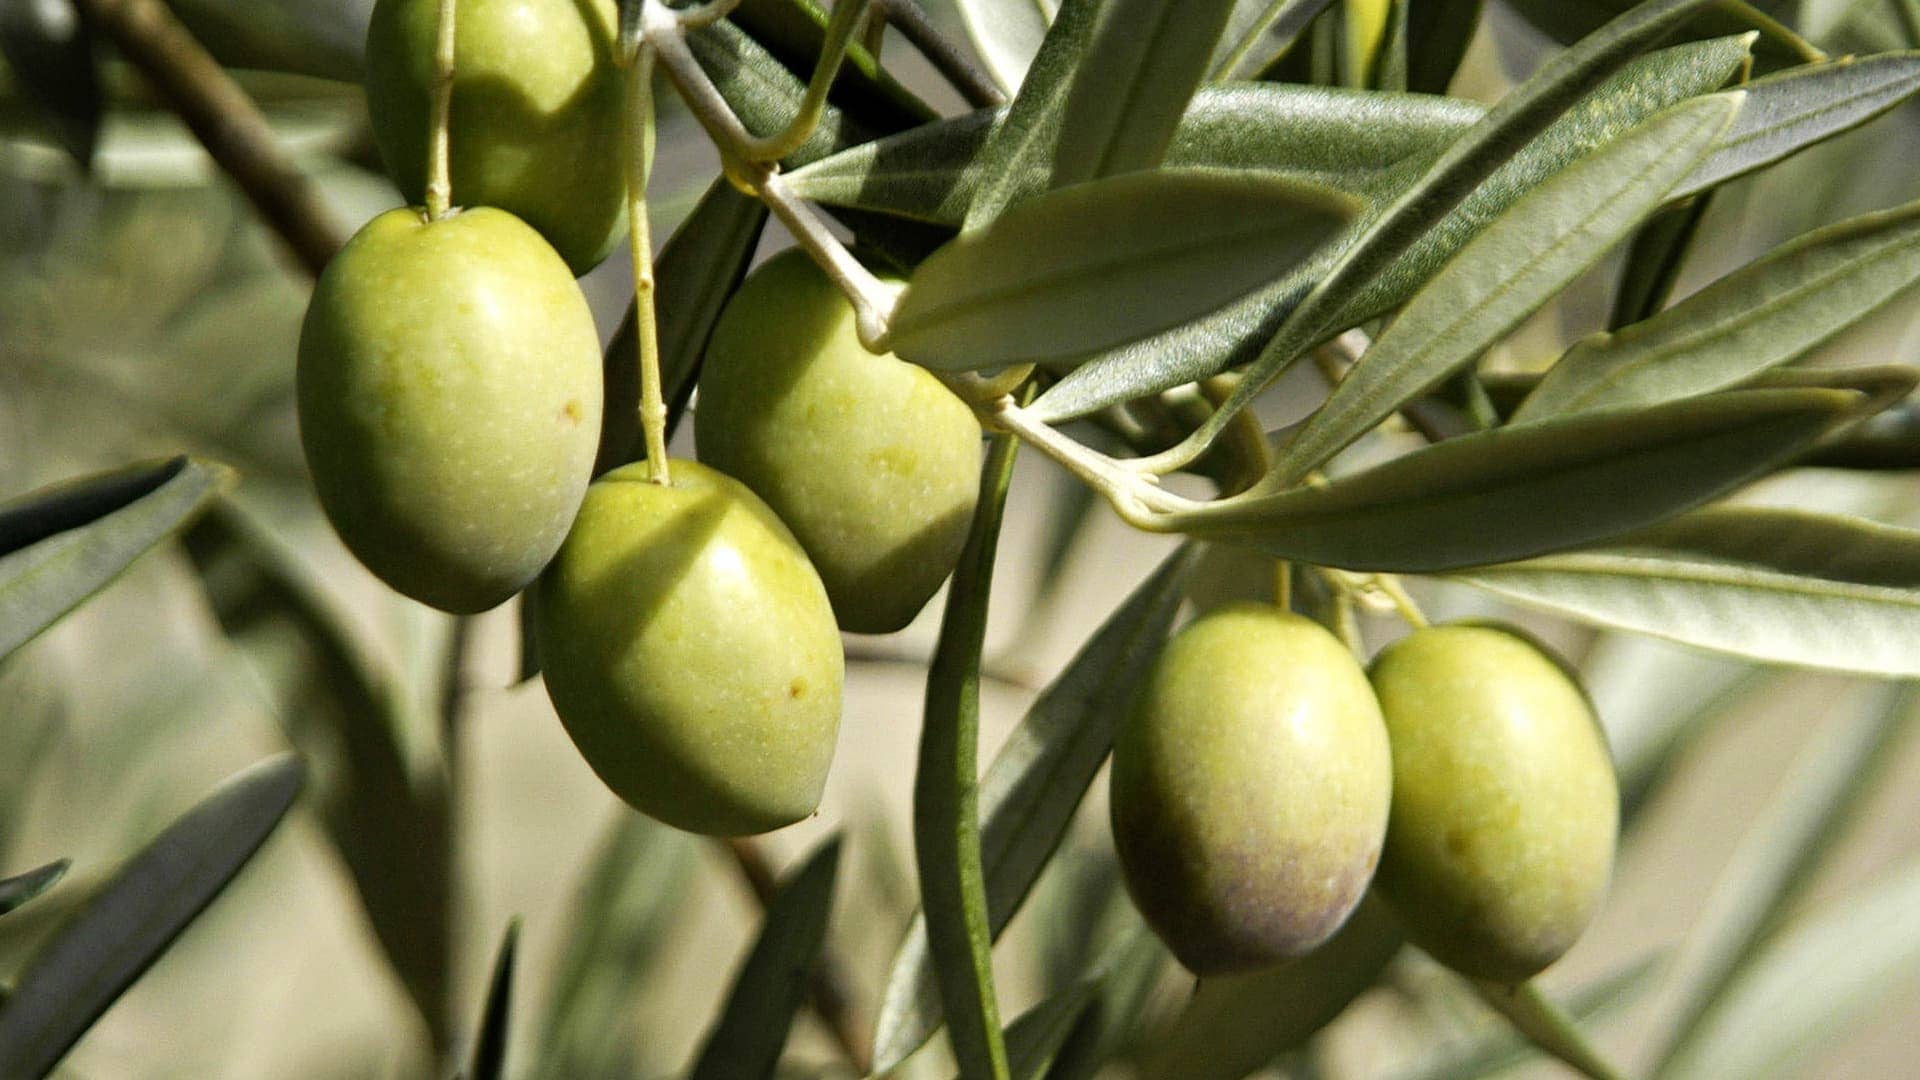 live-world-olive-oil-competition-results-live-updates-olive-oil-times